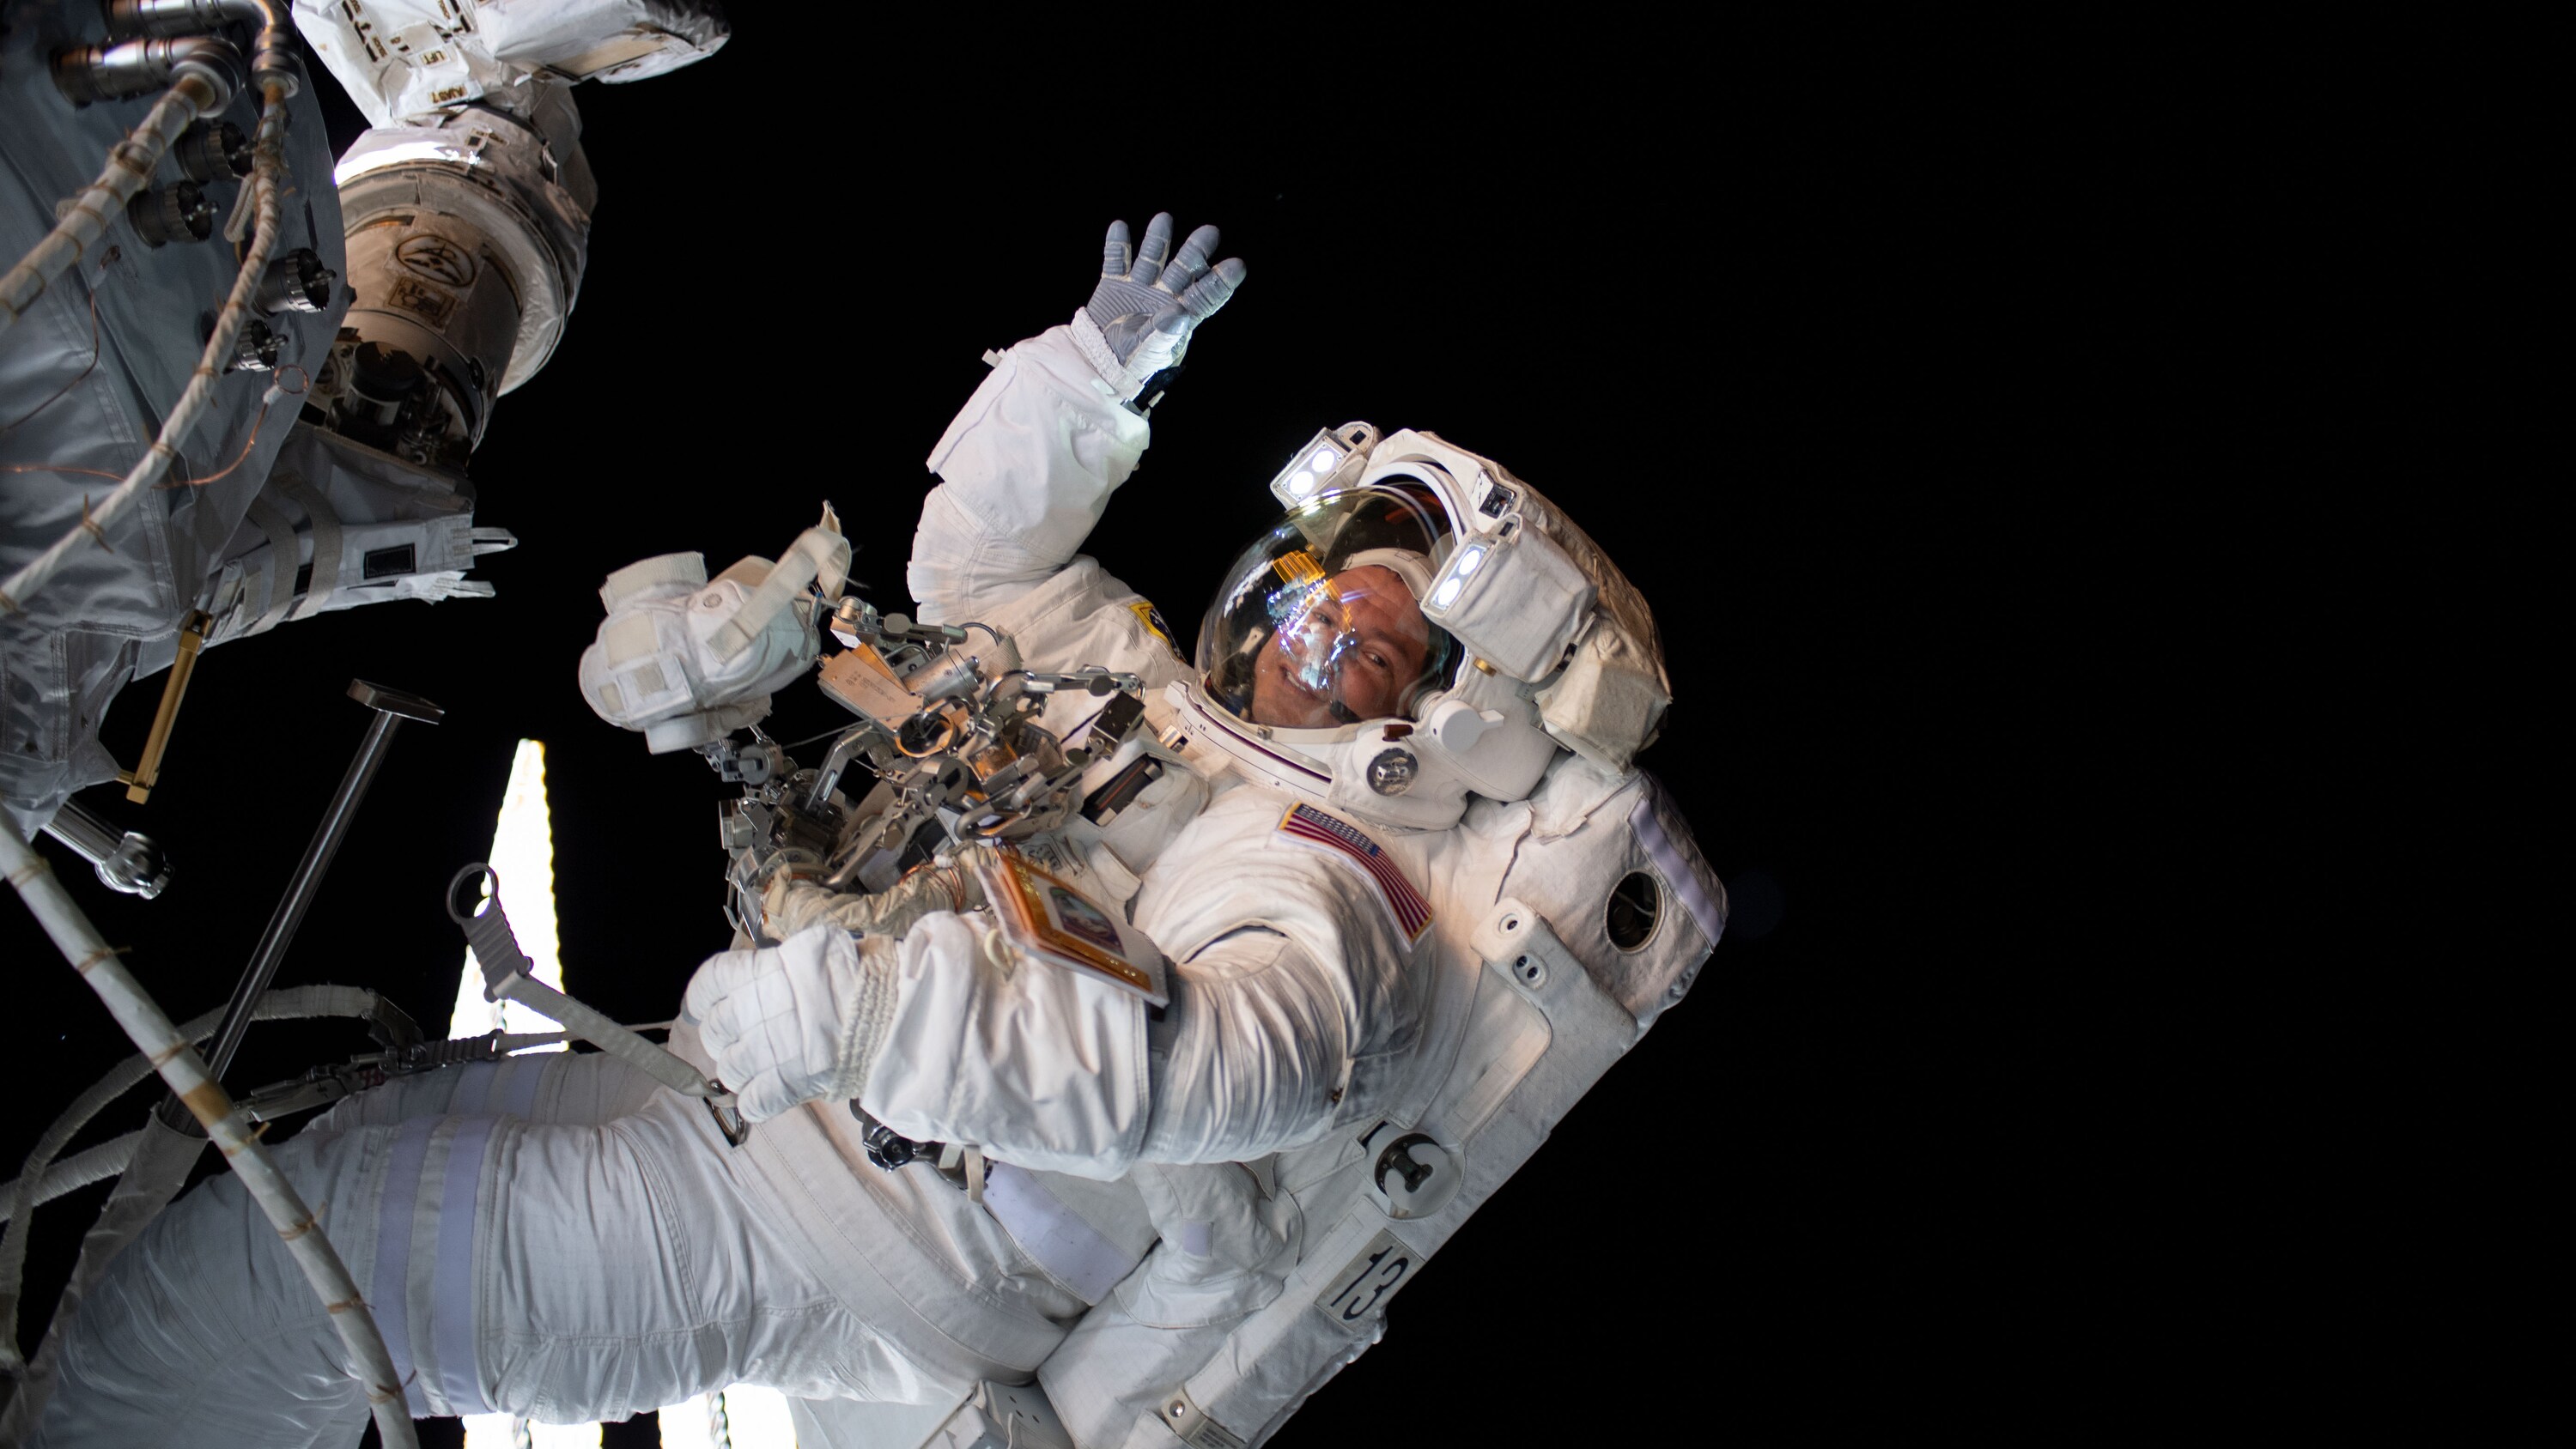 AMONG THE STARS - (Aug. 21, 2019) - NASA astronaut Andrew Morgan waves as he is photographed during a spacewalk to install the International Space Station’s second commercial crew vehicle docking port, the International Docking Adapter-3 (IDA-3). (NASA) ANDREW MORGAN